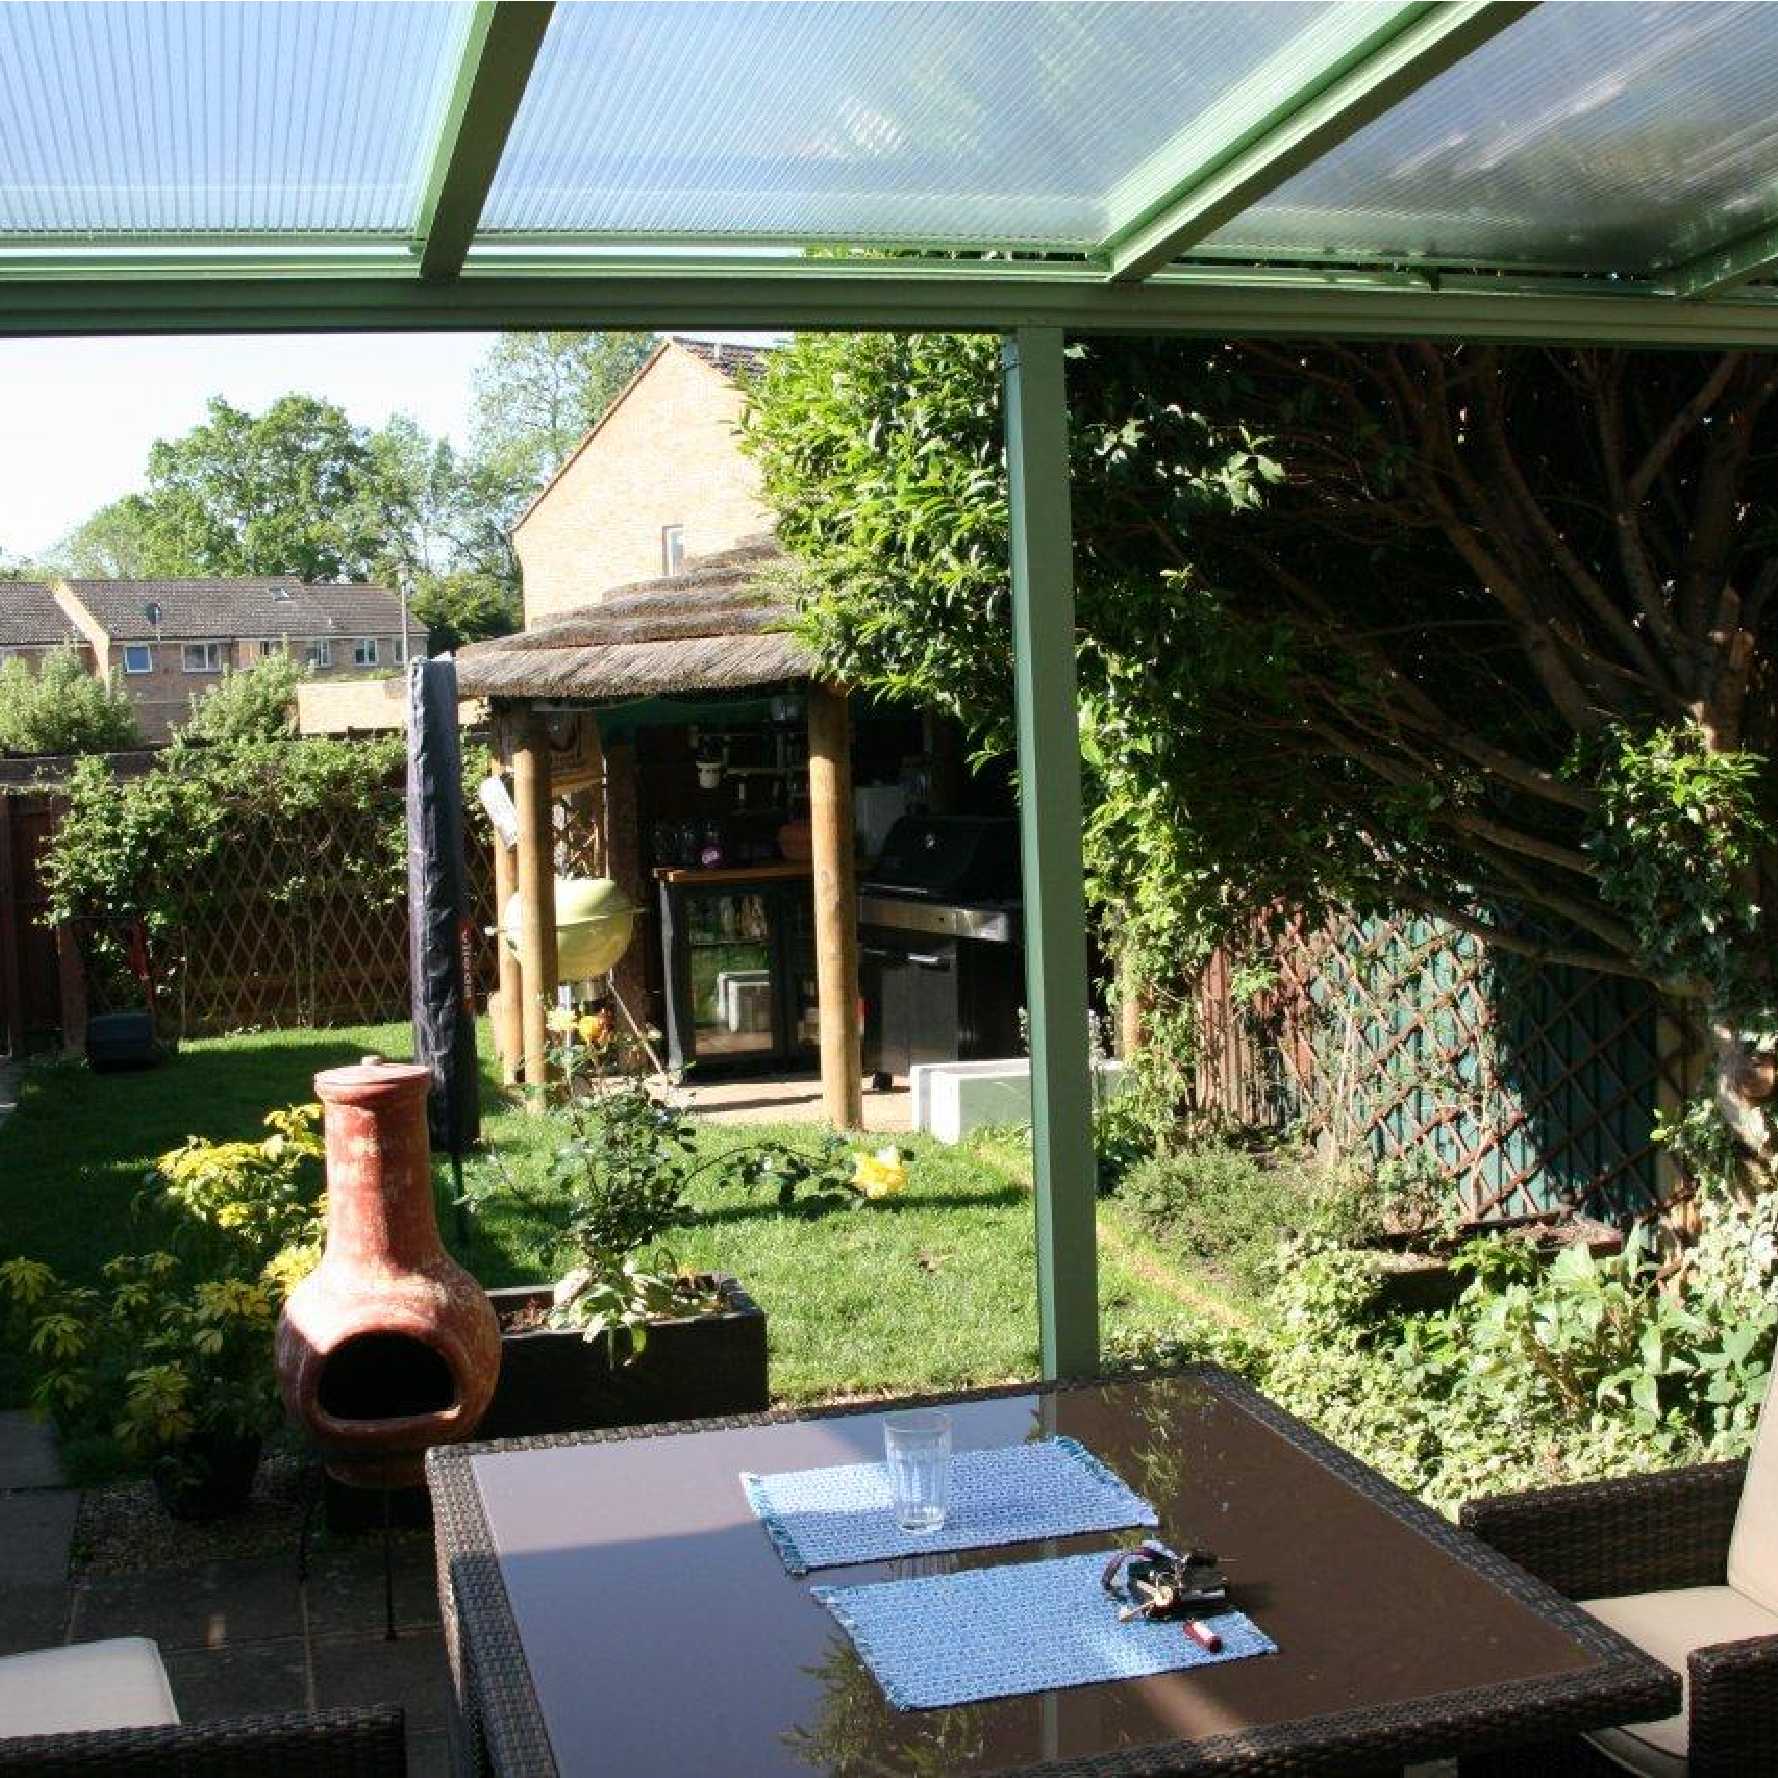 Affordable Omega Smart Lean-To Canopy, White with 16mm Polycarbonate Glazing - 6.3m (W) x 4.5m (P), (4) Supporting Posts